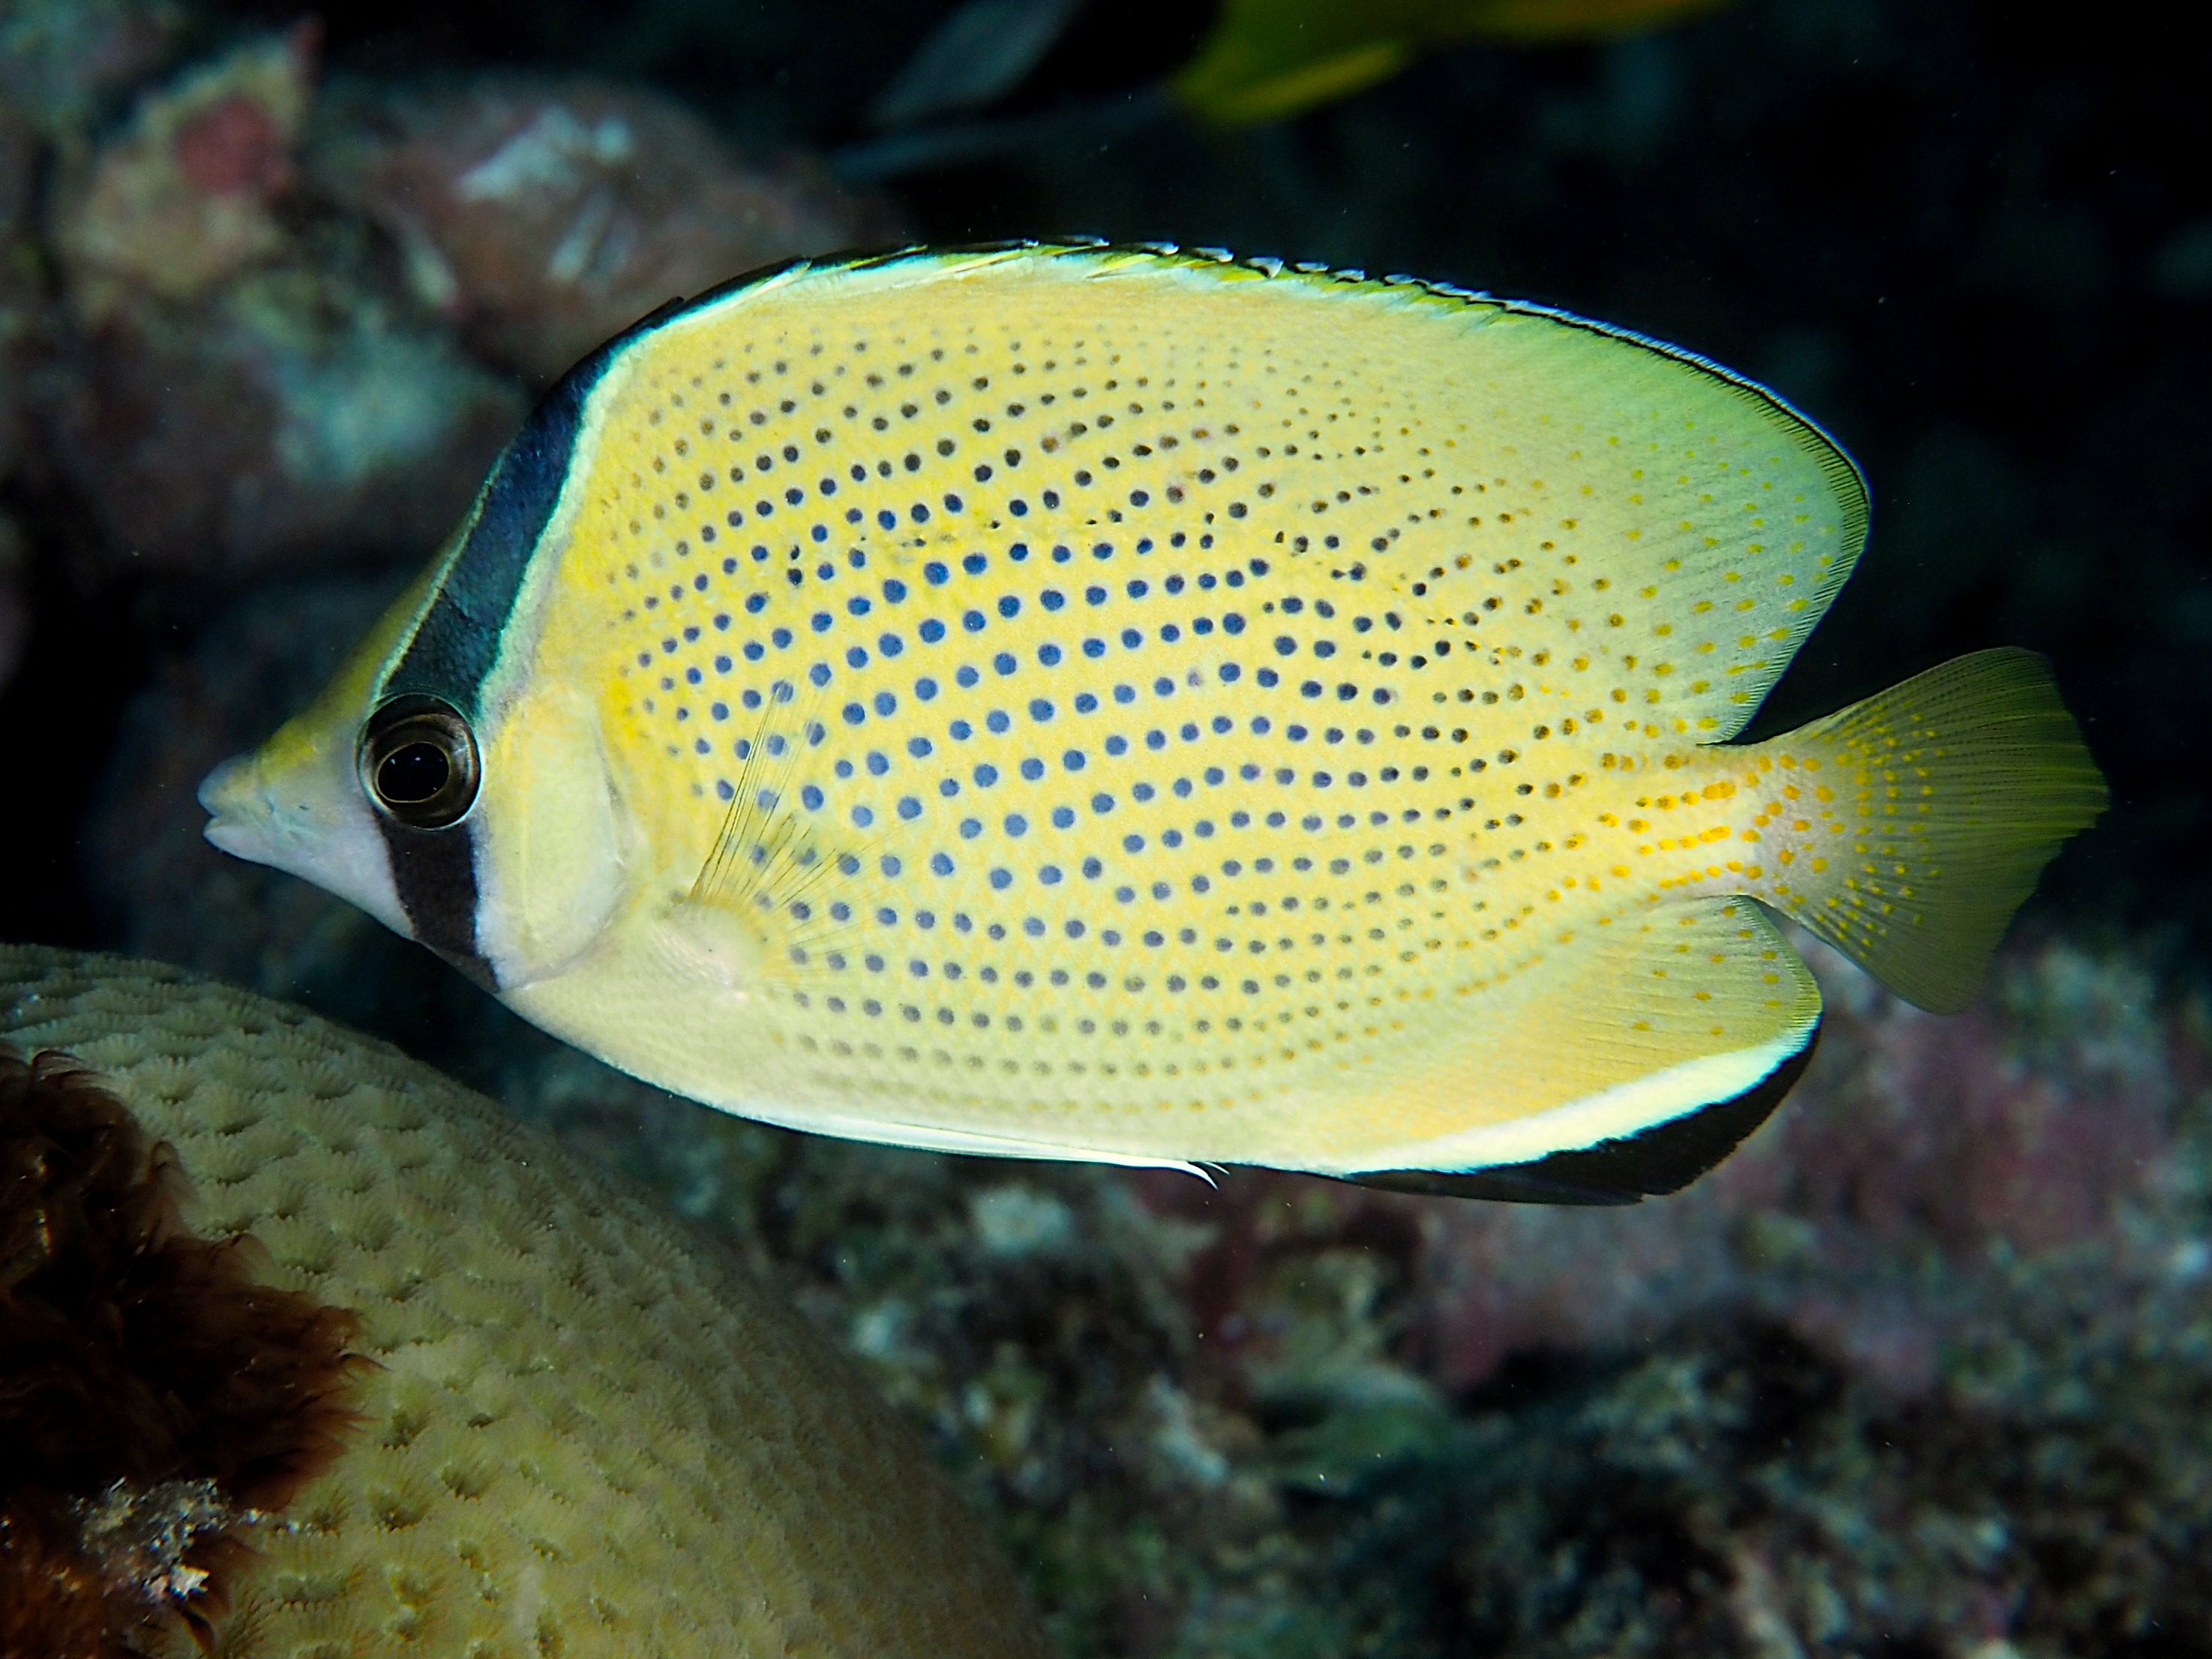 Speckled Butterflyfish - Chaetodon citrinellus